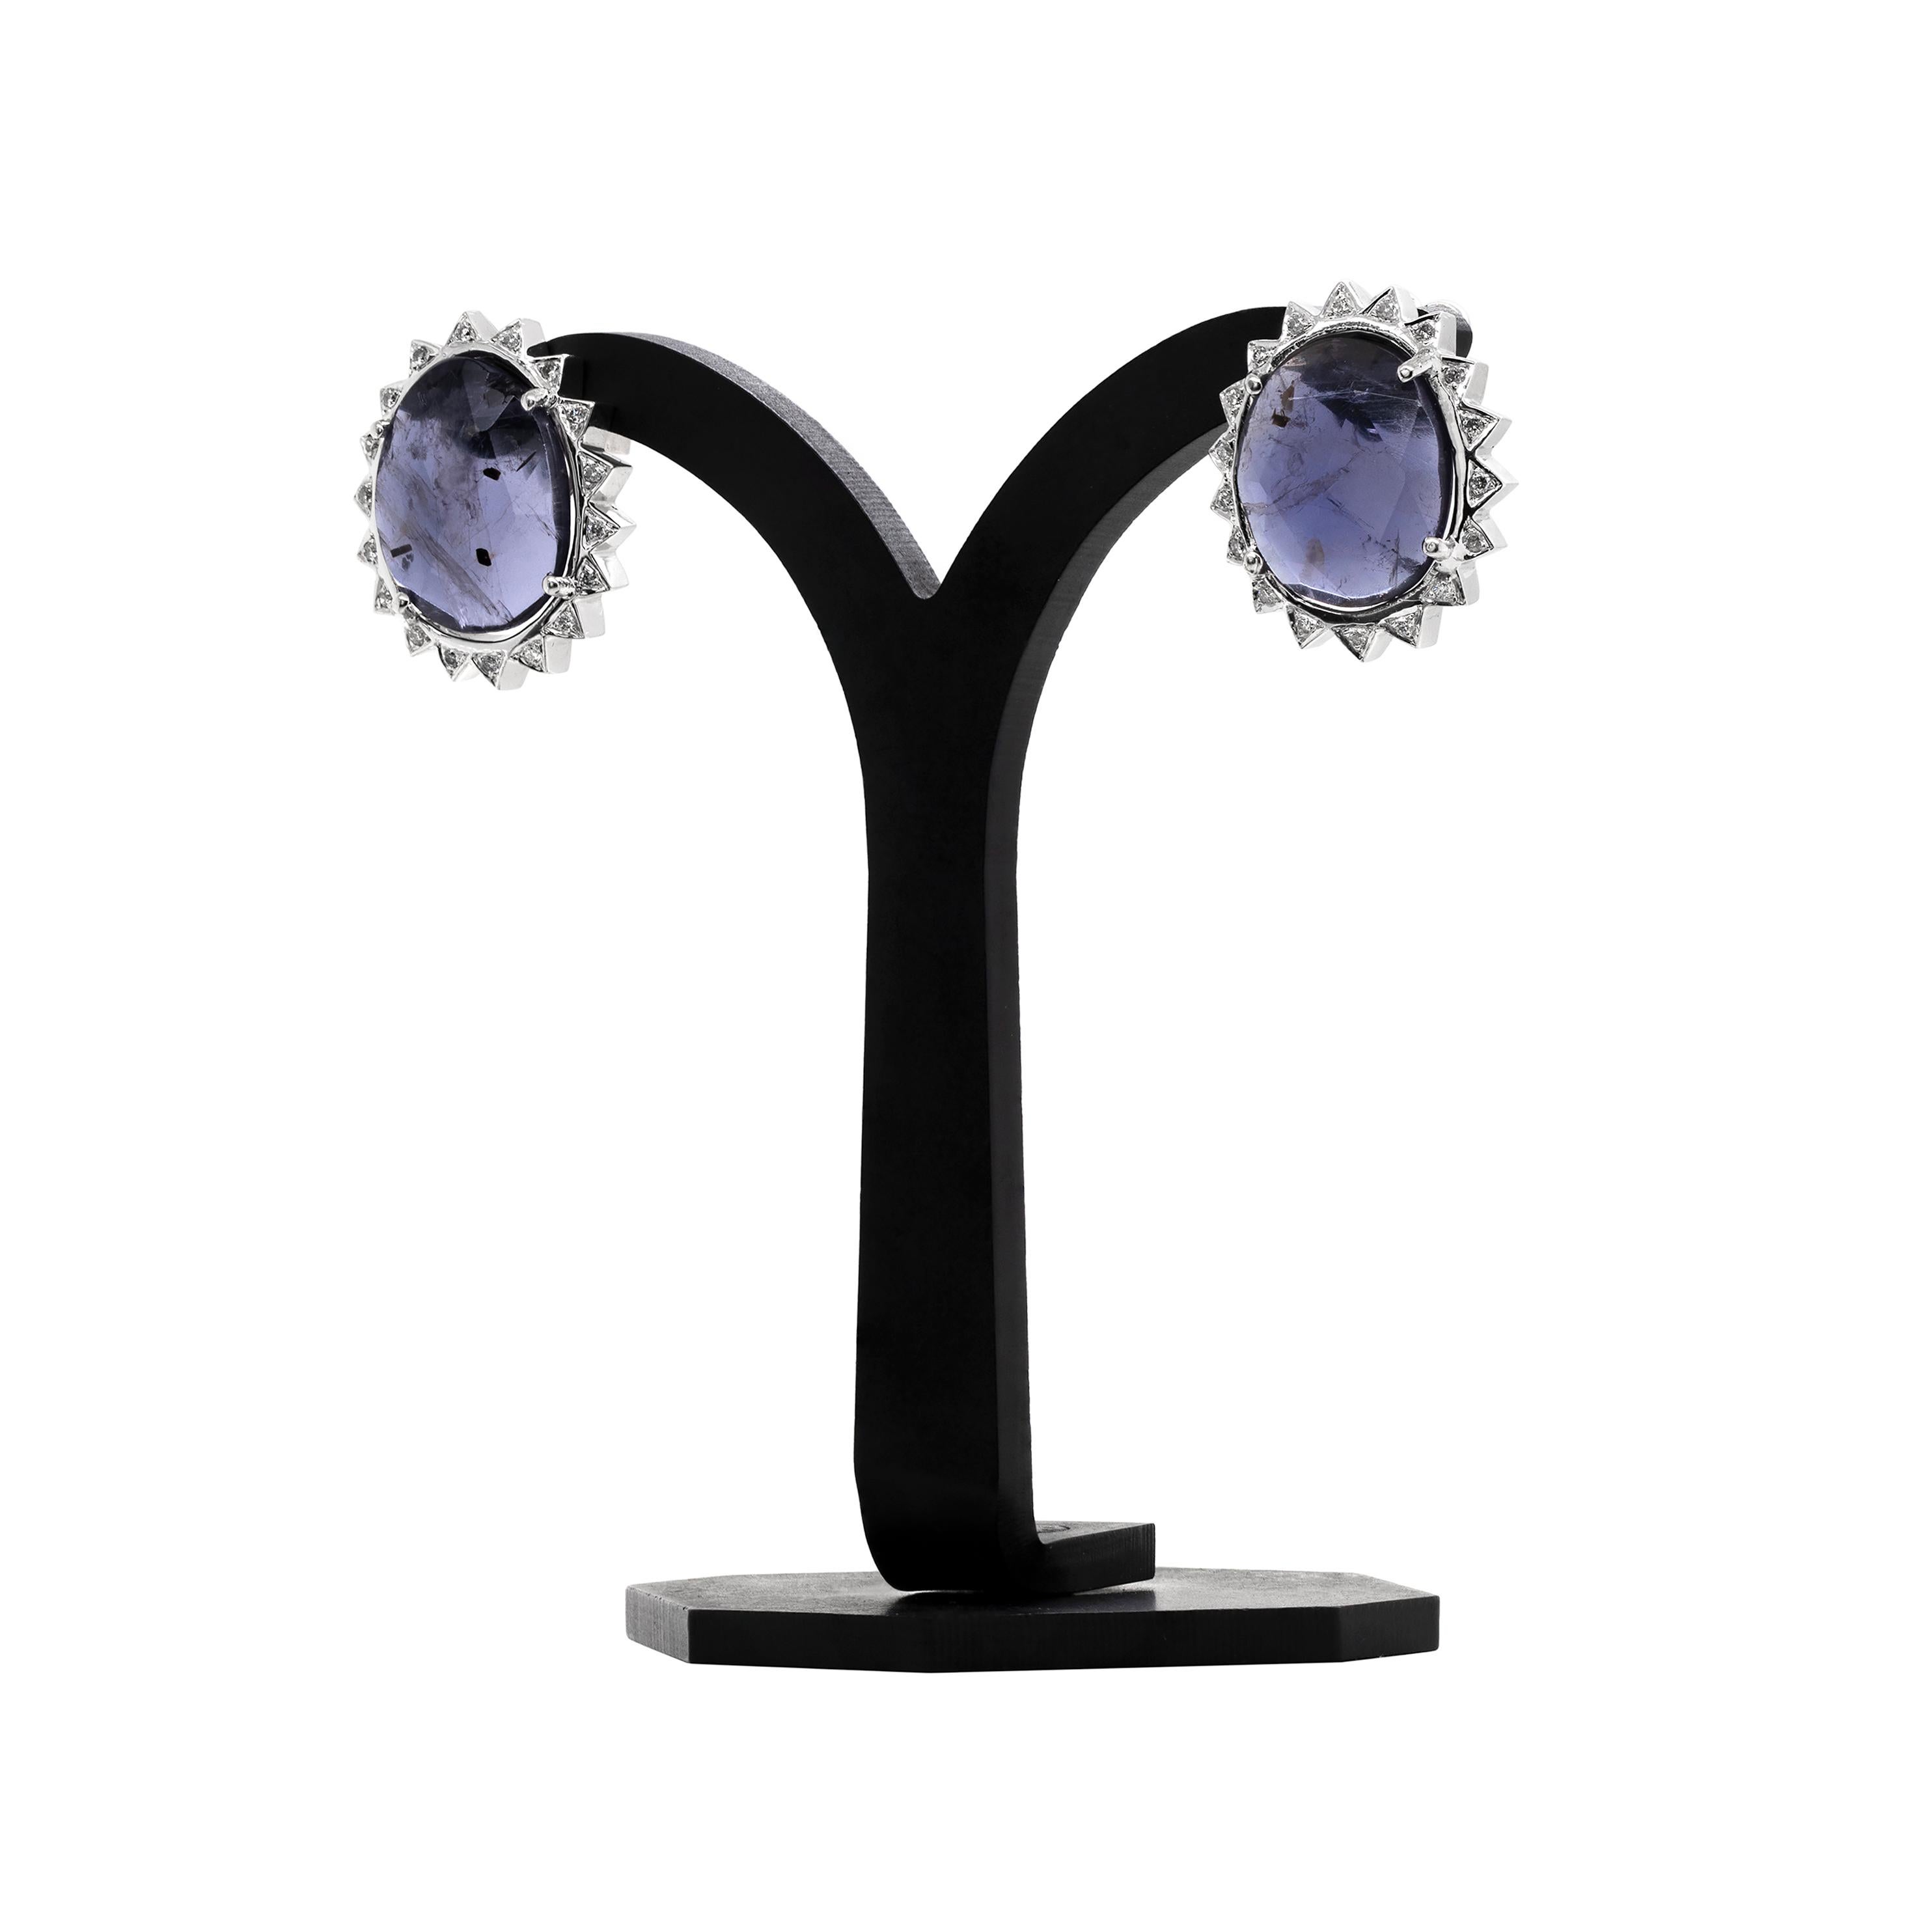 These one of a kind earrings beautifully feature a multi faceted purple iolite stone in the center, weighing approximately 3.70ct in each, mounted in a four claw, open back setting. The iolite is wonderfully surrounded by 18 round brilliant cut